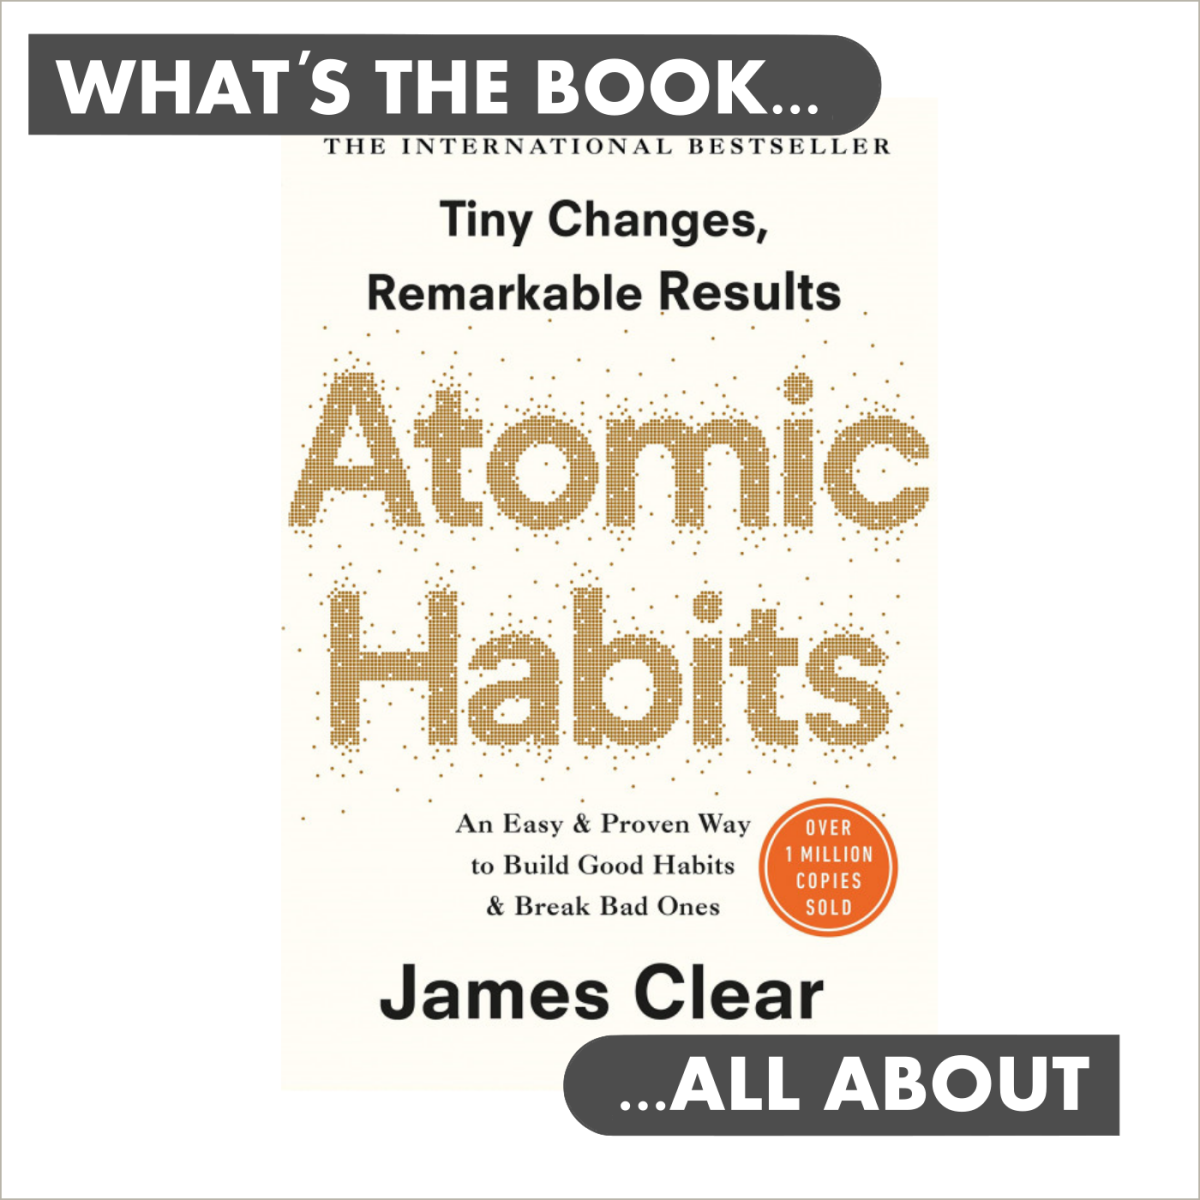 Key tidbits from Atomic Habits to help you slowly introduce